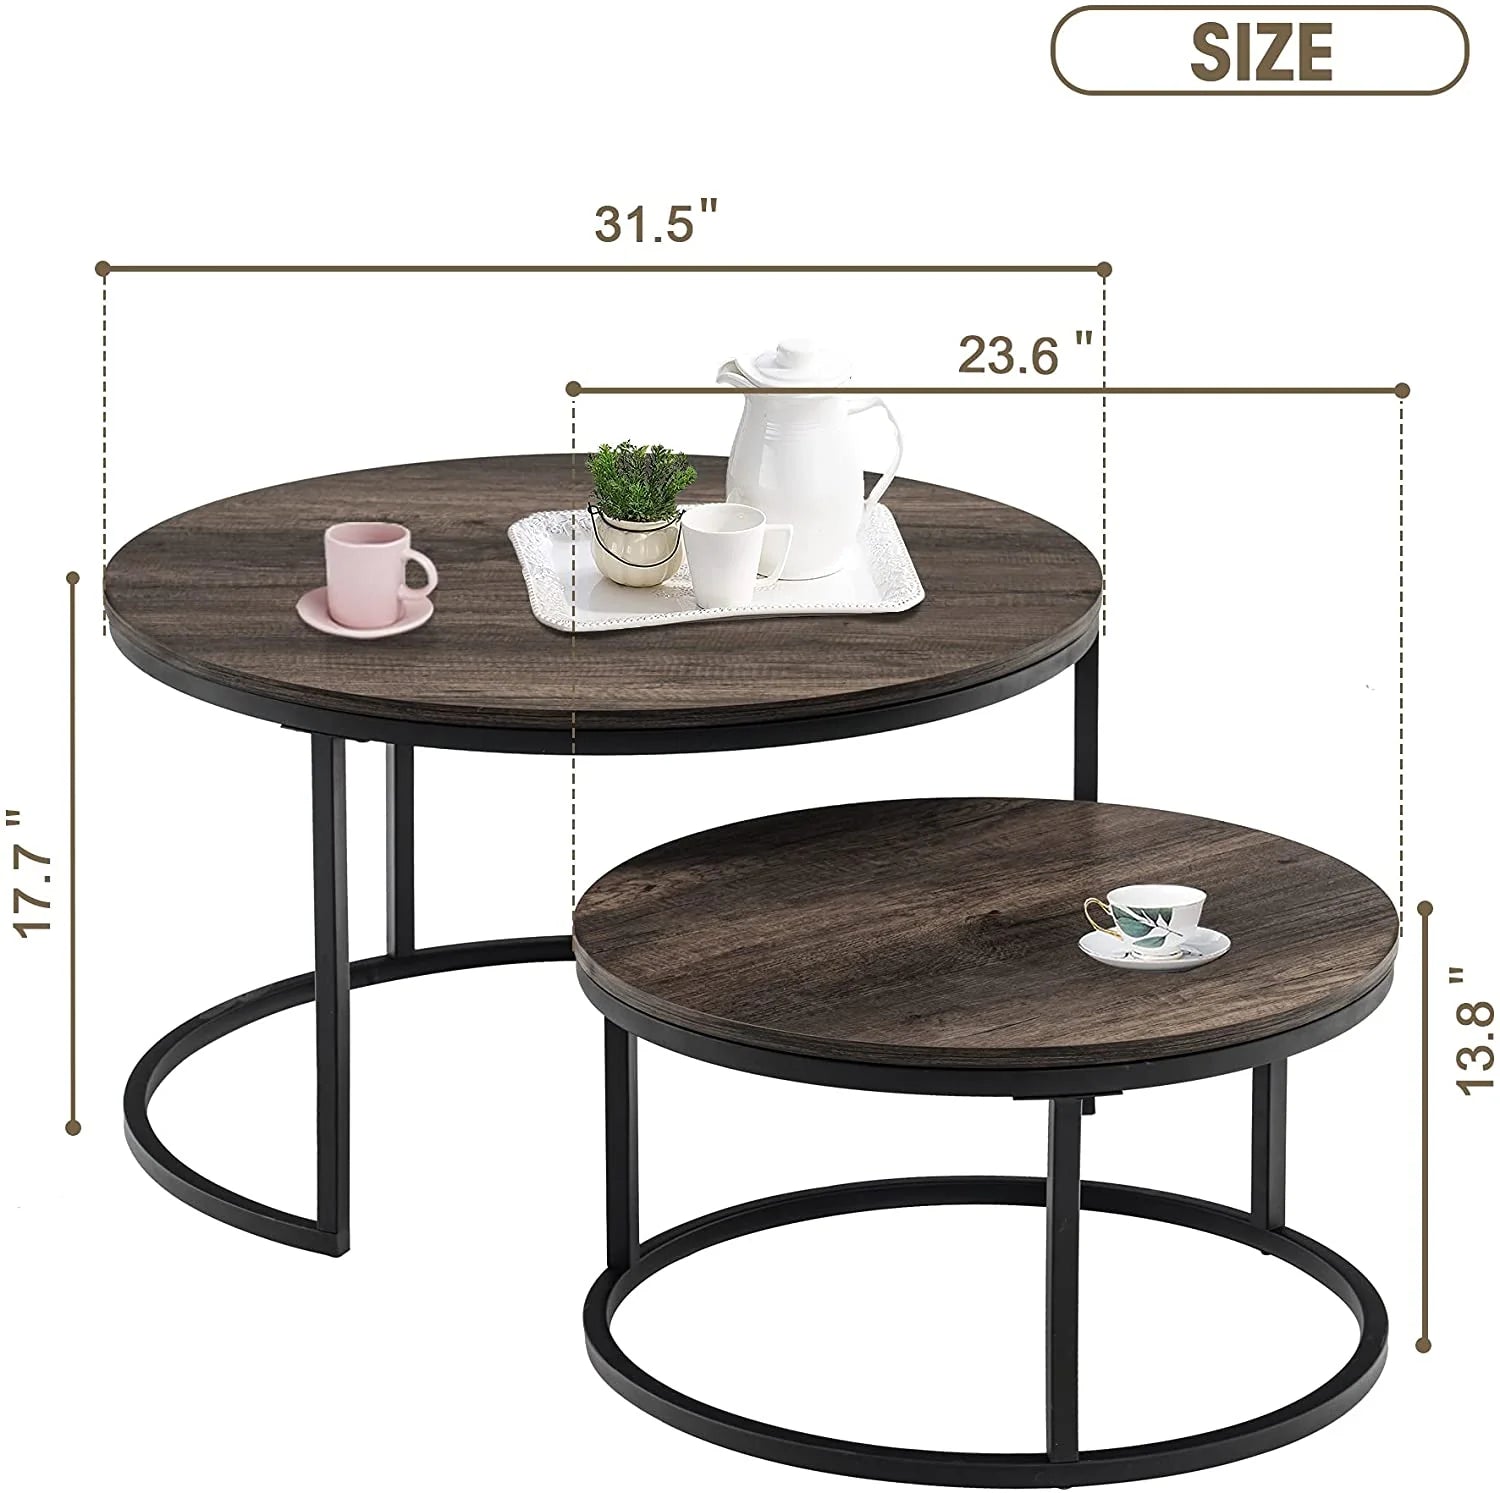 Nest Of Tables: Coffee Table and End Table Sets, Farmhouse Wood Coffee Table Set of 2